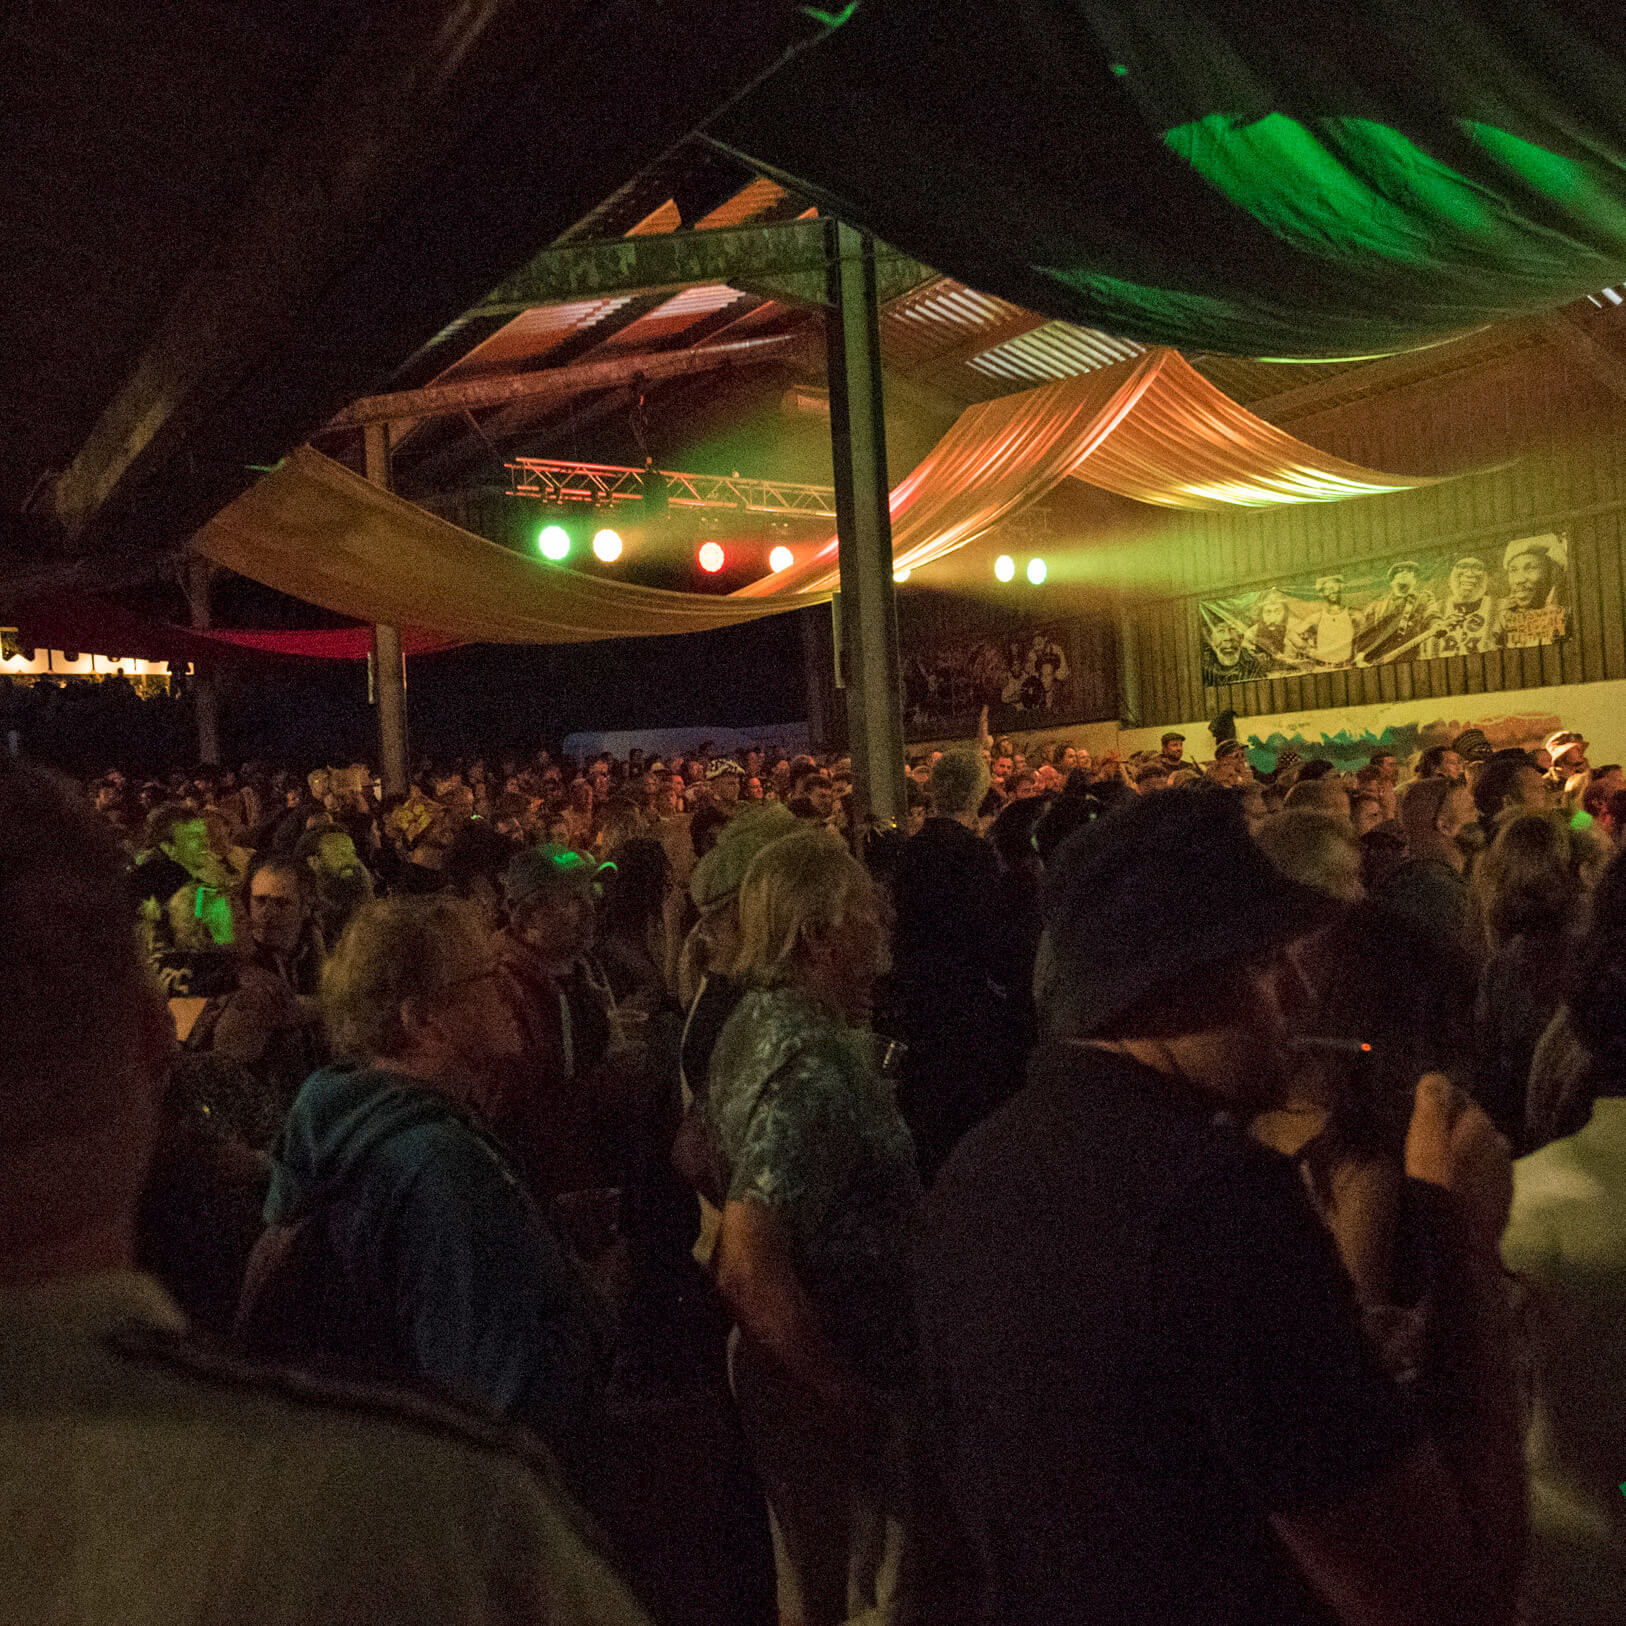 A packed main stage on Saturday evening